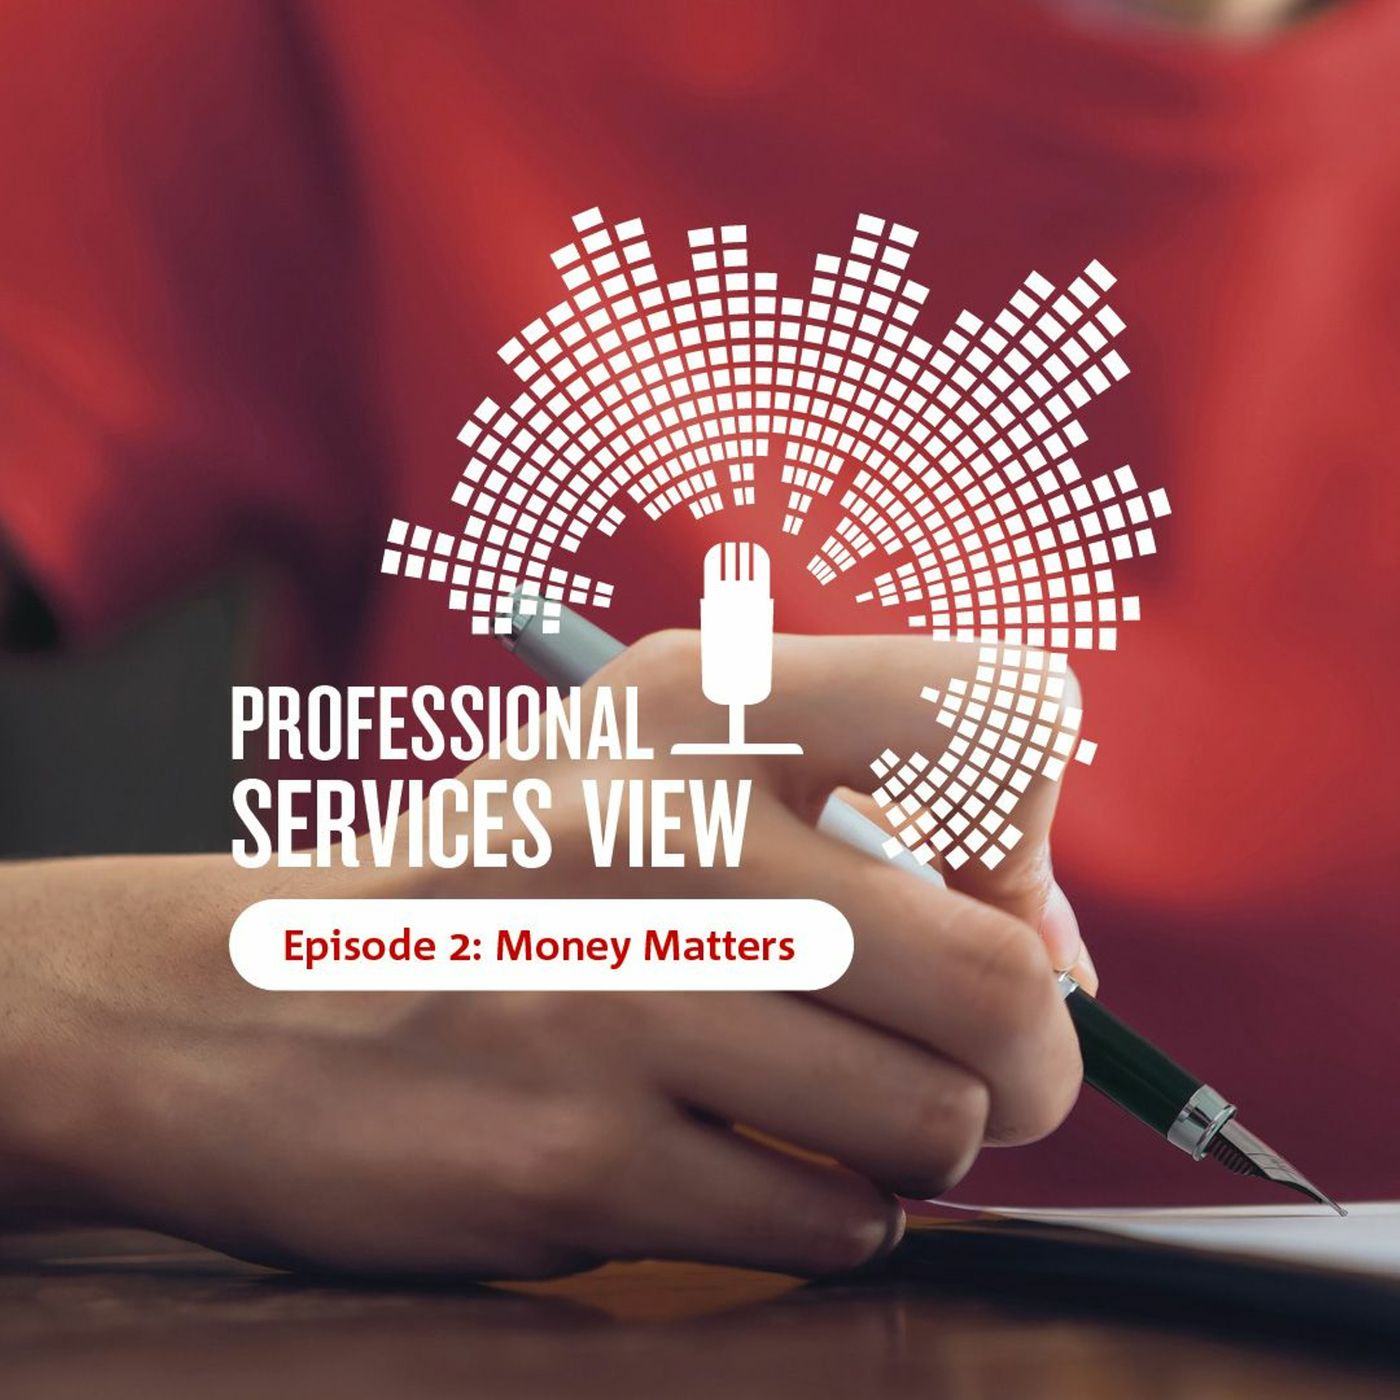 Professional Services View Episode 2: Money matters